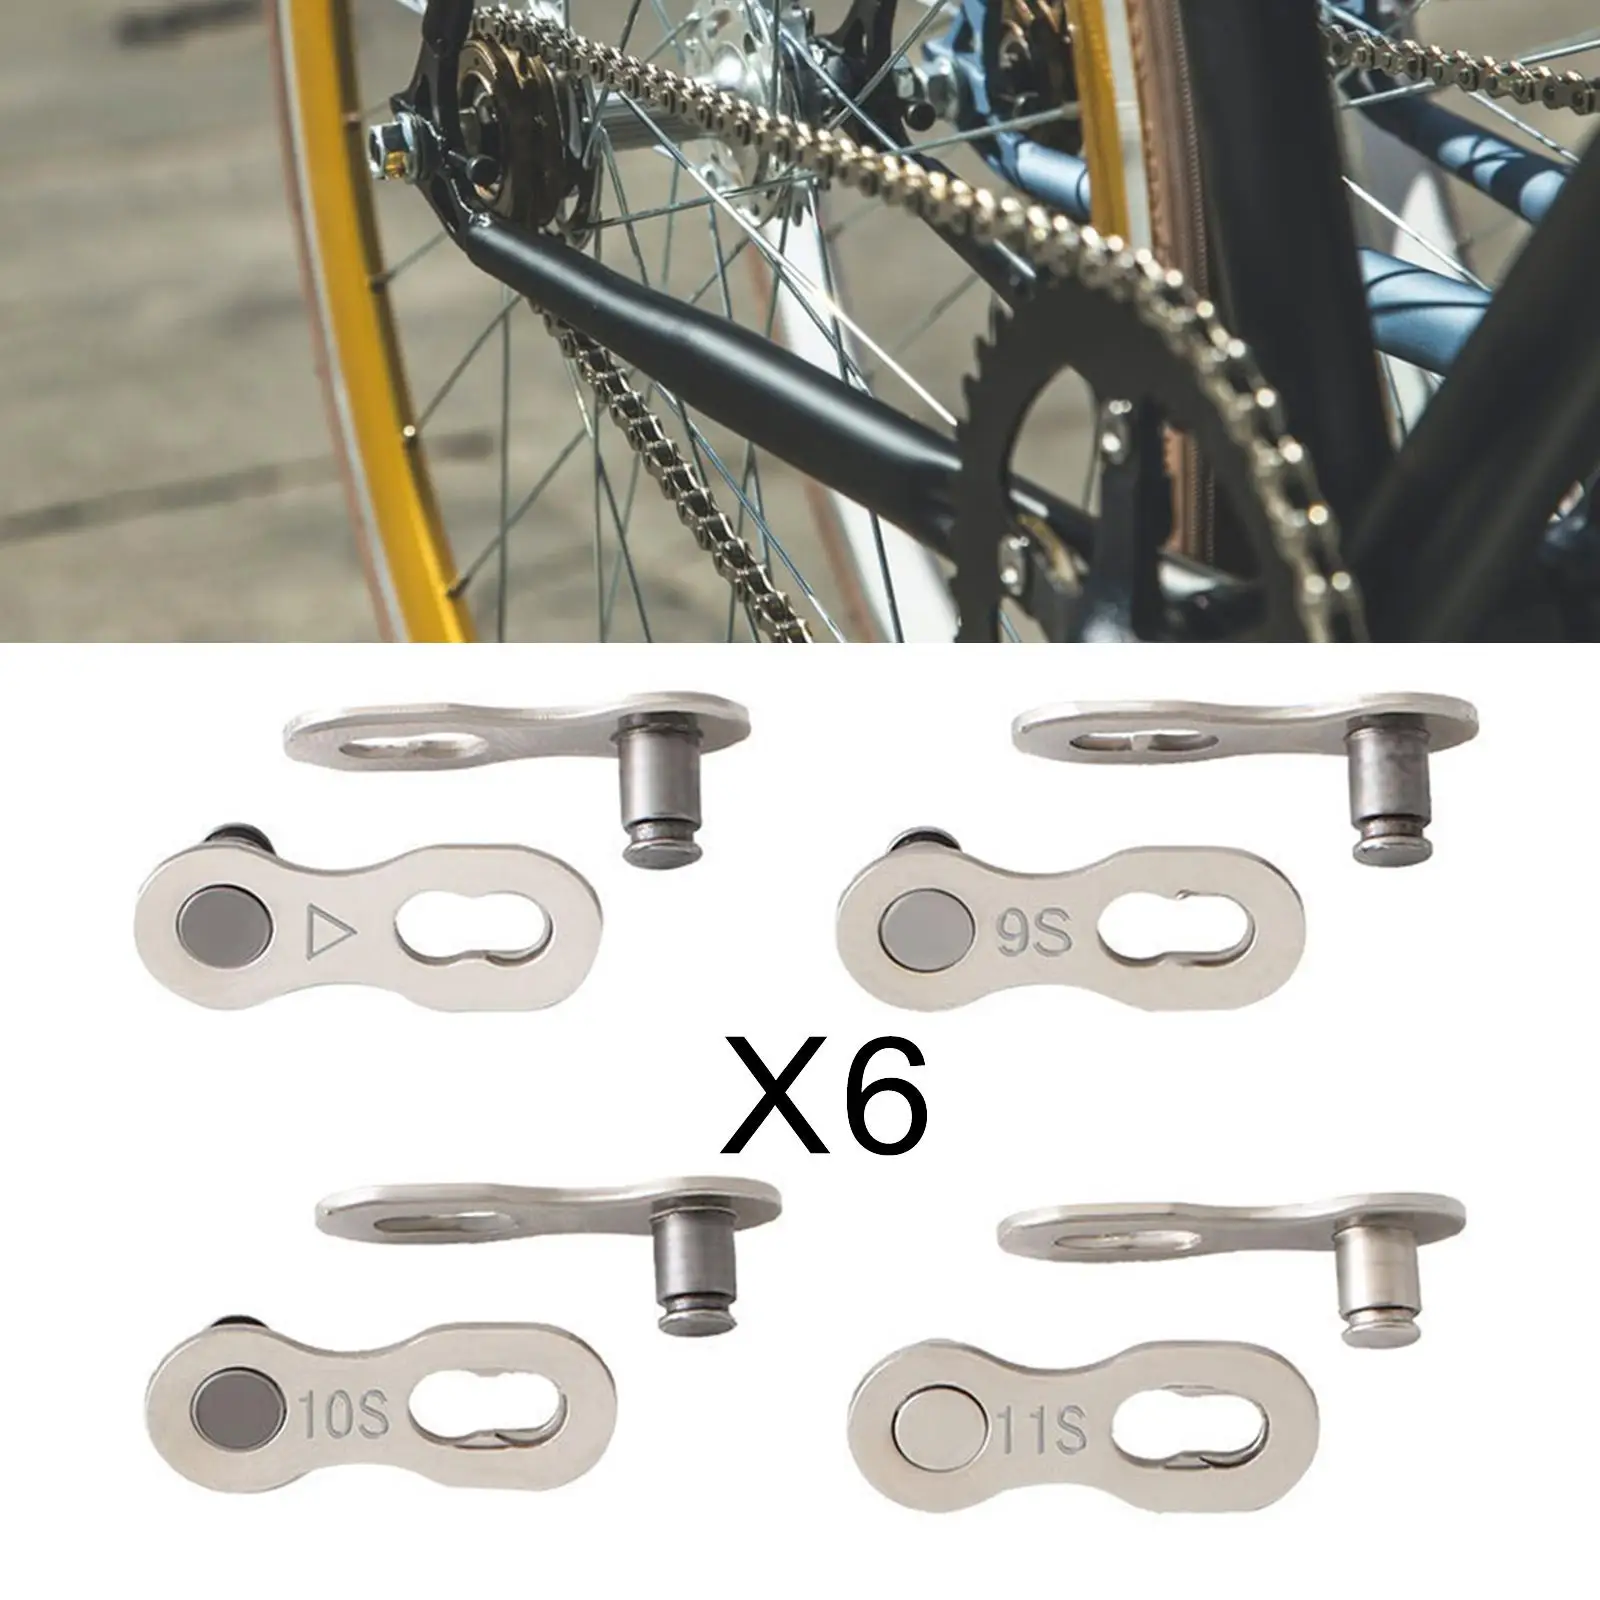 Road Bike Chain Master Links Chain Connector Quick-Link Bicycle Chain Steel Quick Coupling Missing Link for 6 7 8/9/10/11 Speed